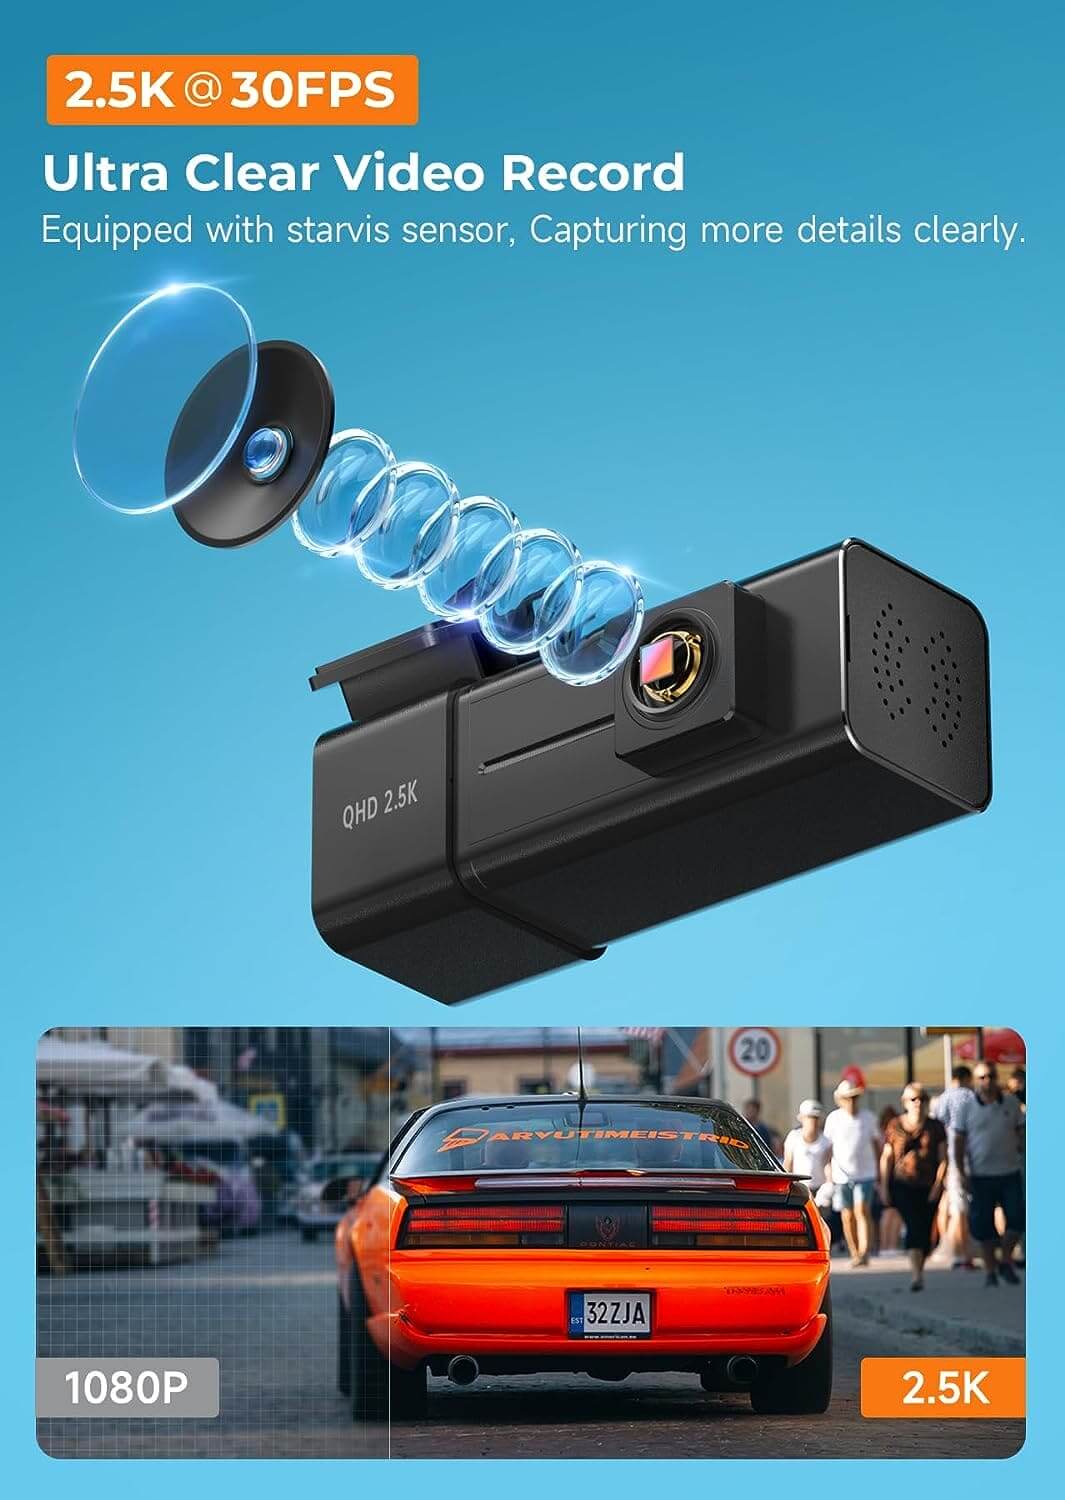 4K Dash Cam Front and Rear WiFi FHD 1080P Mini Dash Camera for Cars with  Night Vision, 24 Hours Parking Mode, Loop Recording, G-Sensor